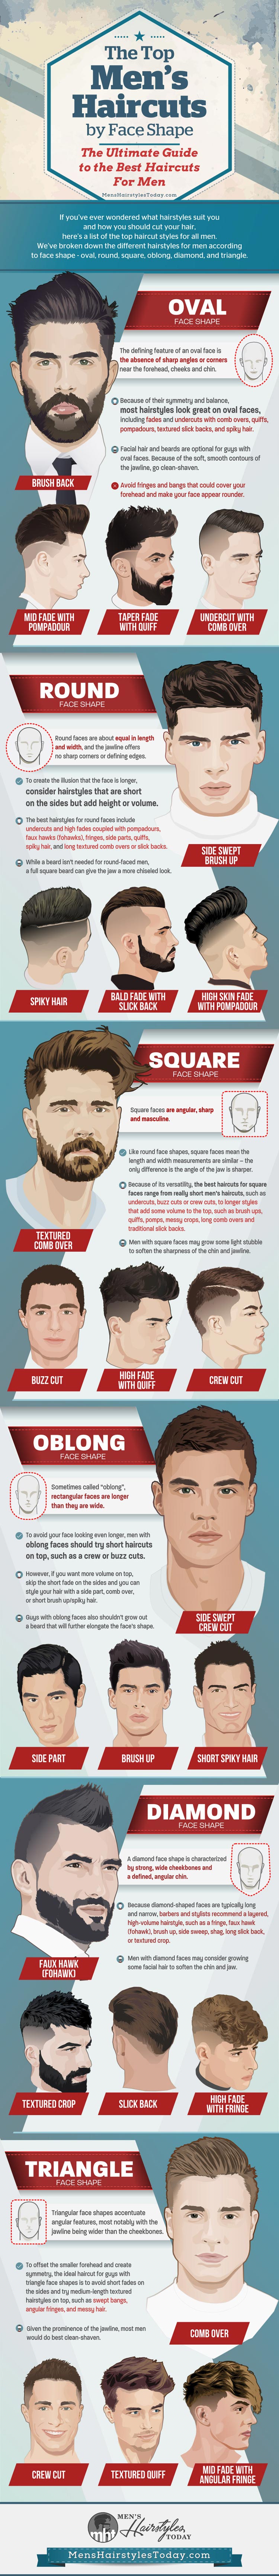 Best Hairstyles for Men - Quiff, Pompadour or High Fade (Infographic) -  North Shore Wigs & Hair Replacement - Boston MA